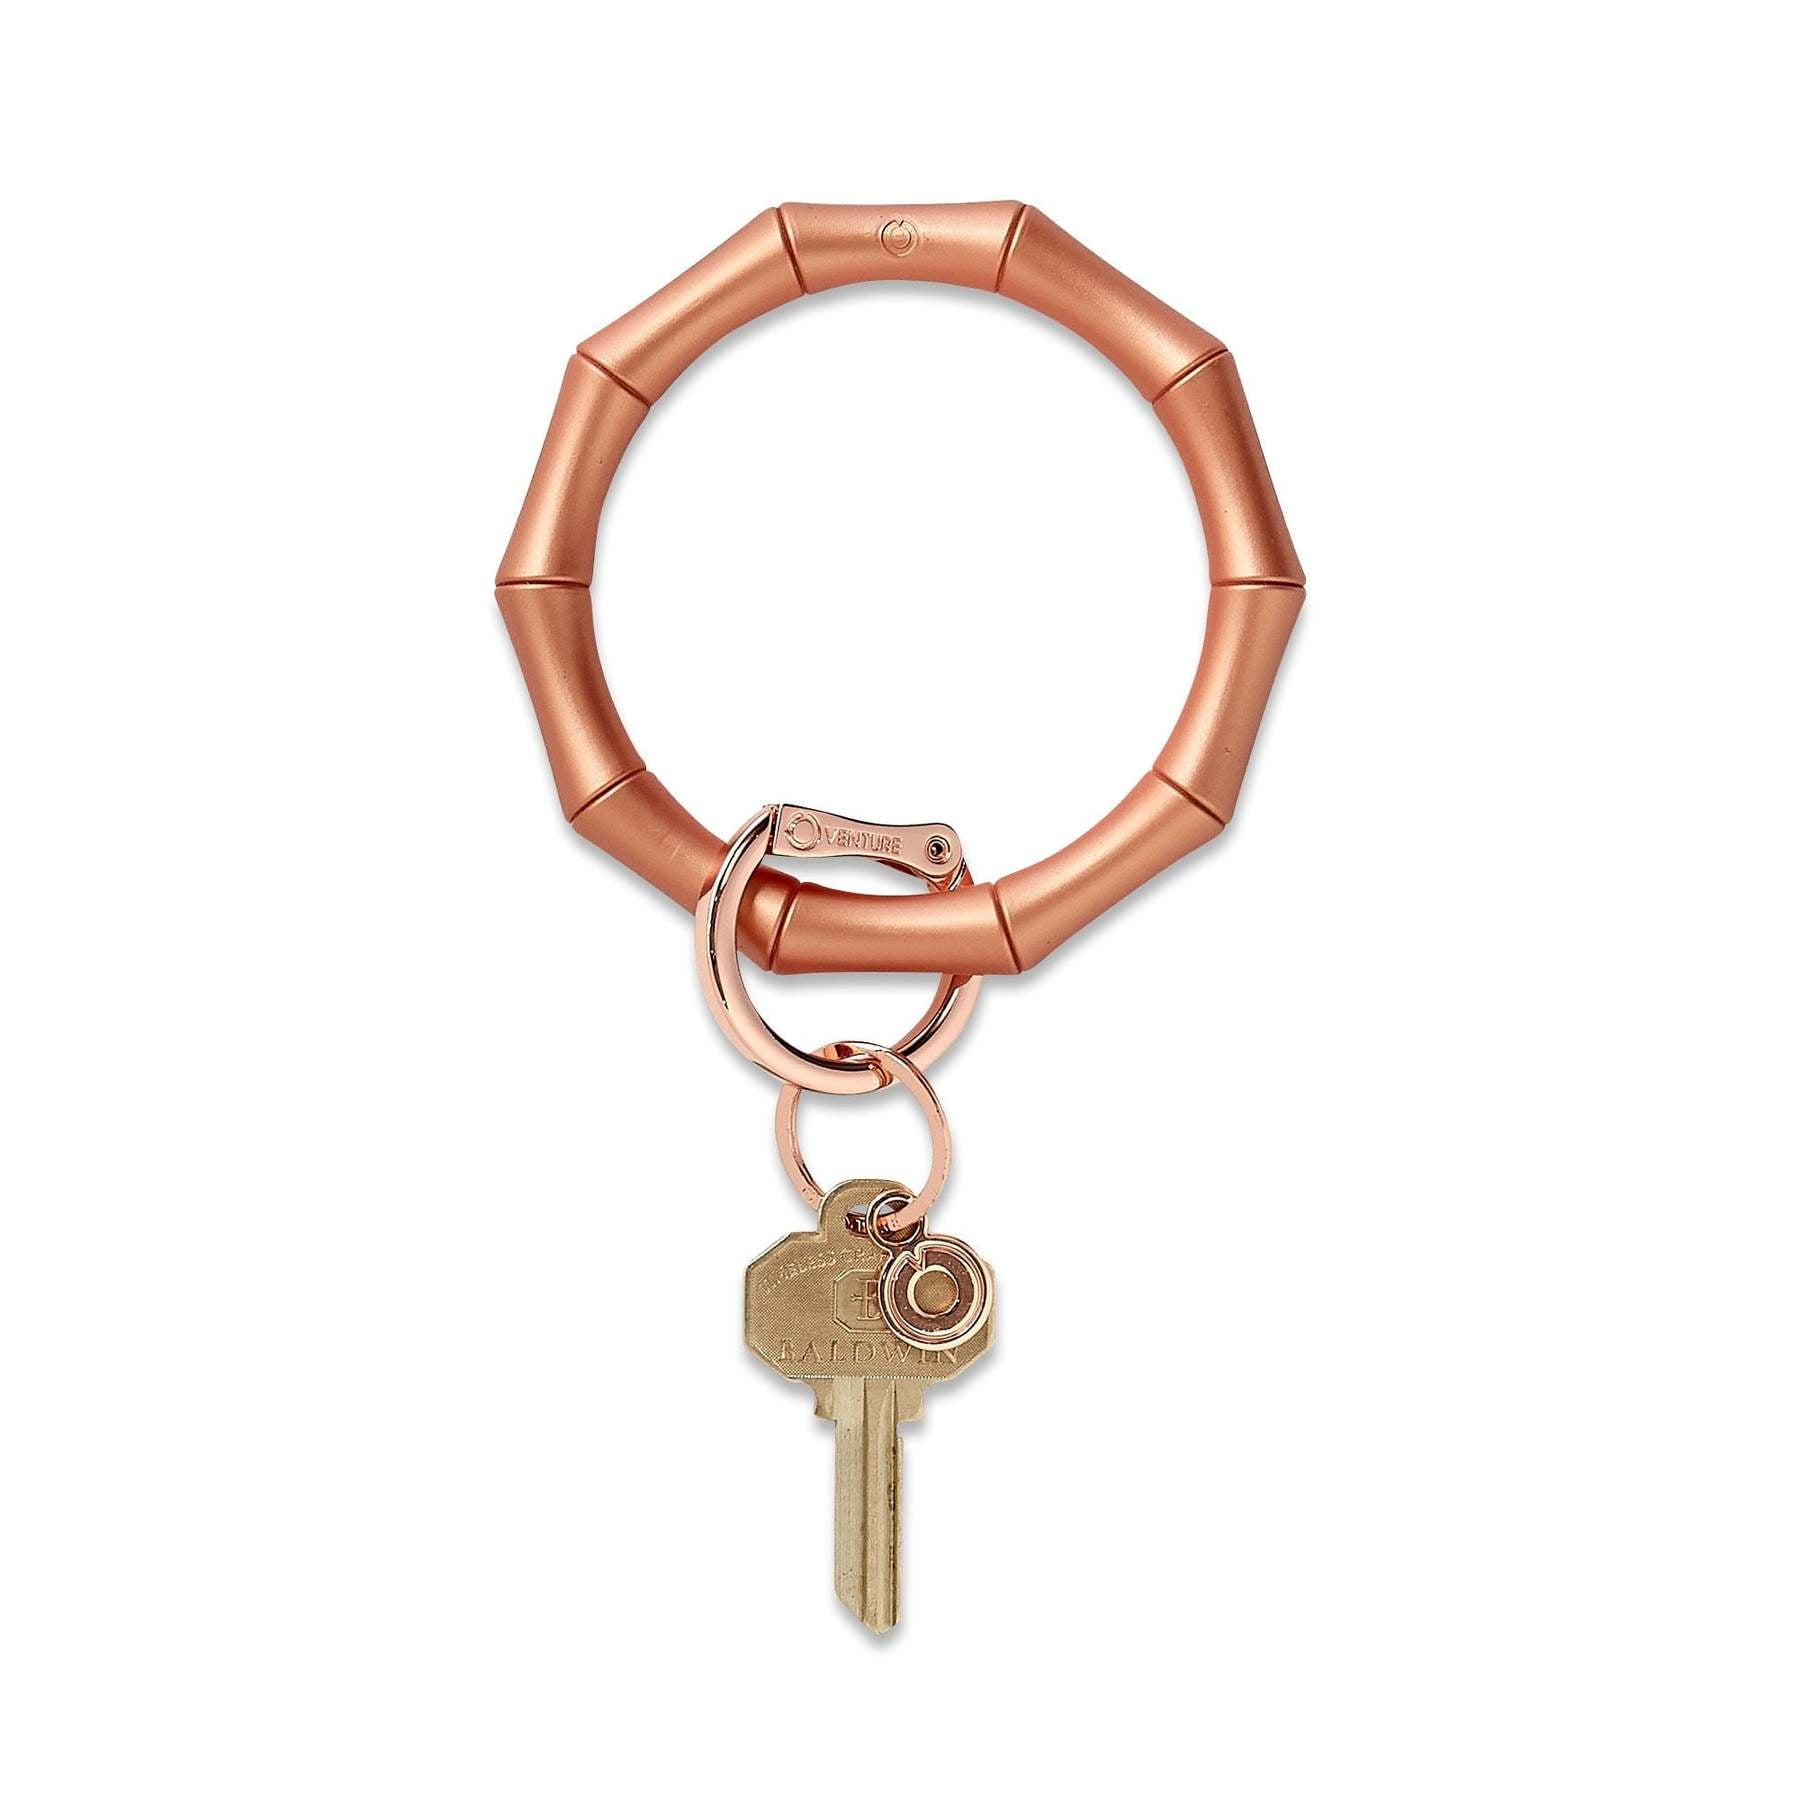 Silicone Big O® Key Ring by Oventure - Charlotte's Web Monogramming & Gifts